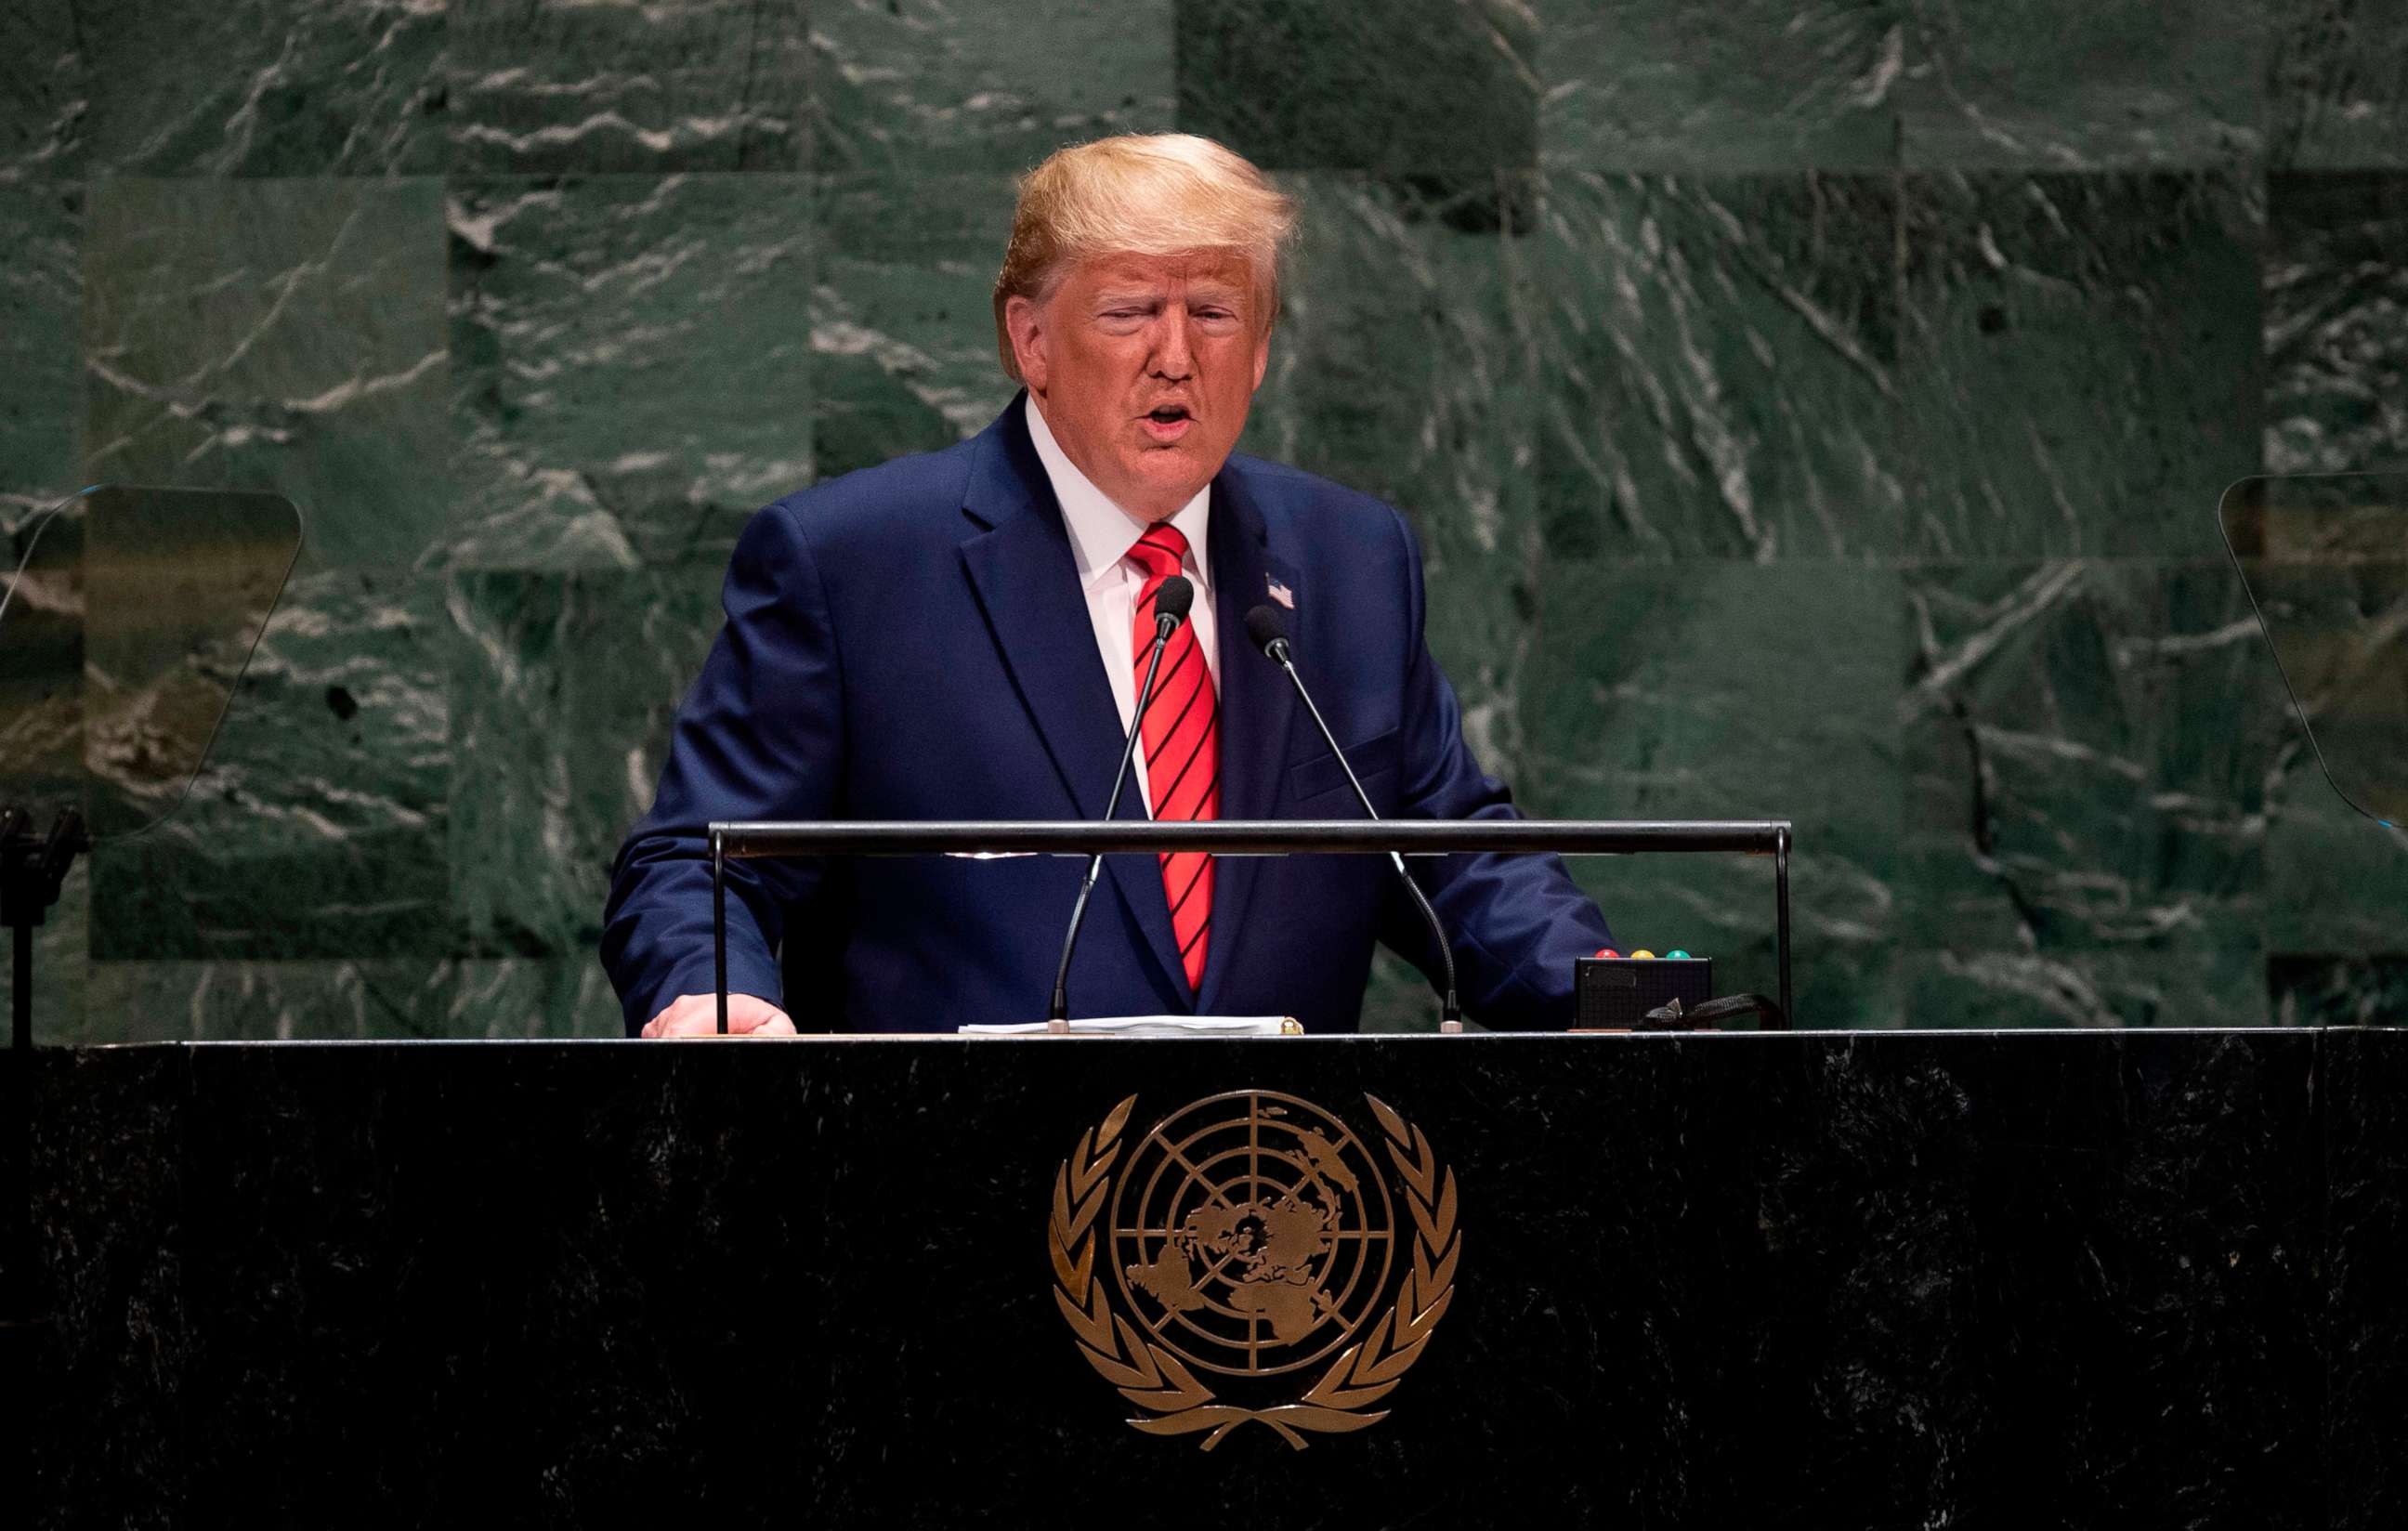 PHOTO: President Donald Trump speaks during the 74th Session of the United Nations General Assembly at UN Headquarters in New York City, Sept. 24, 2019.